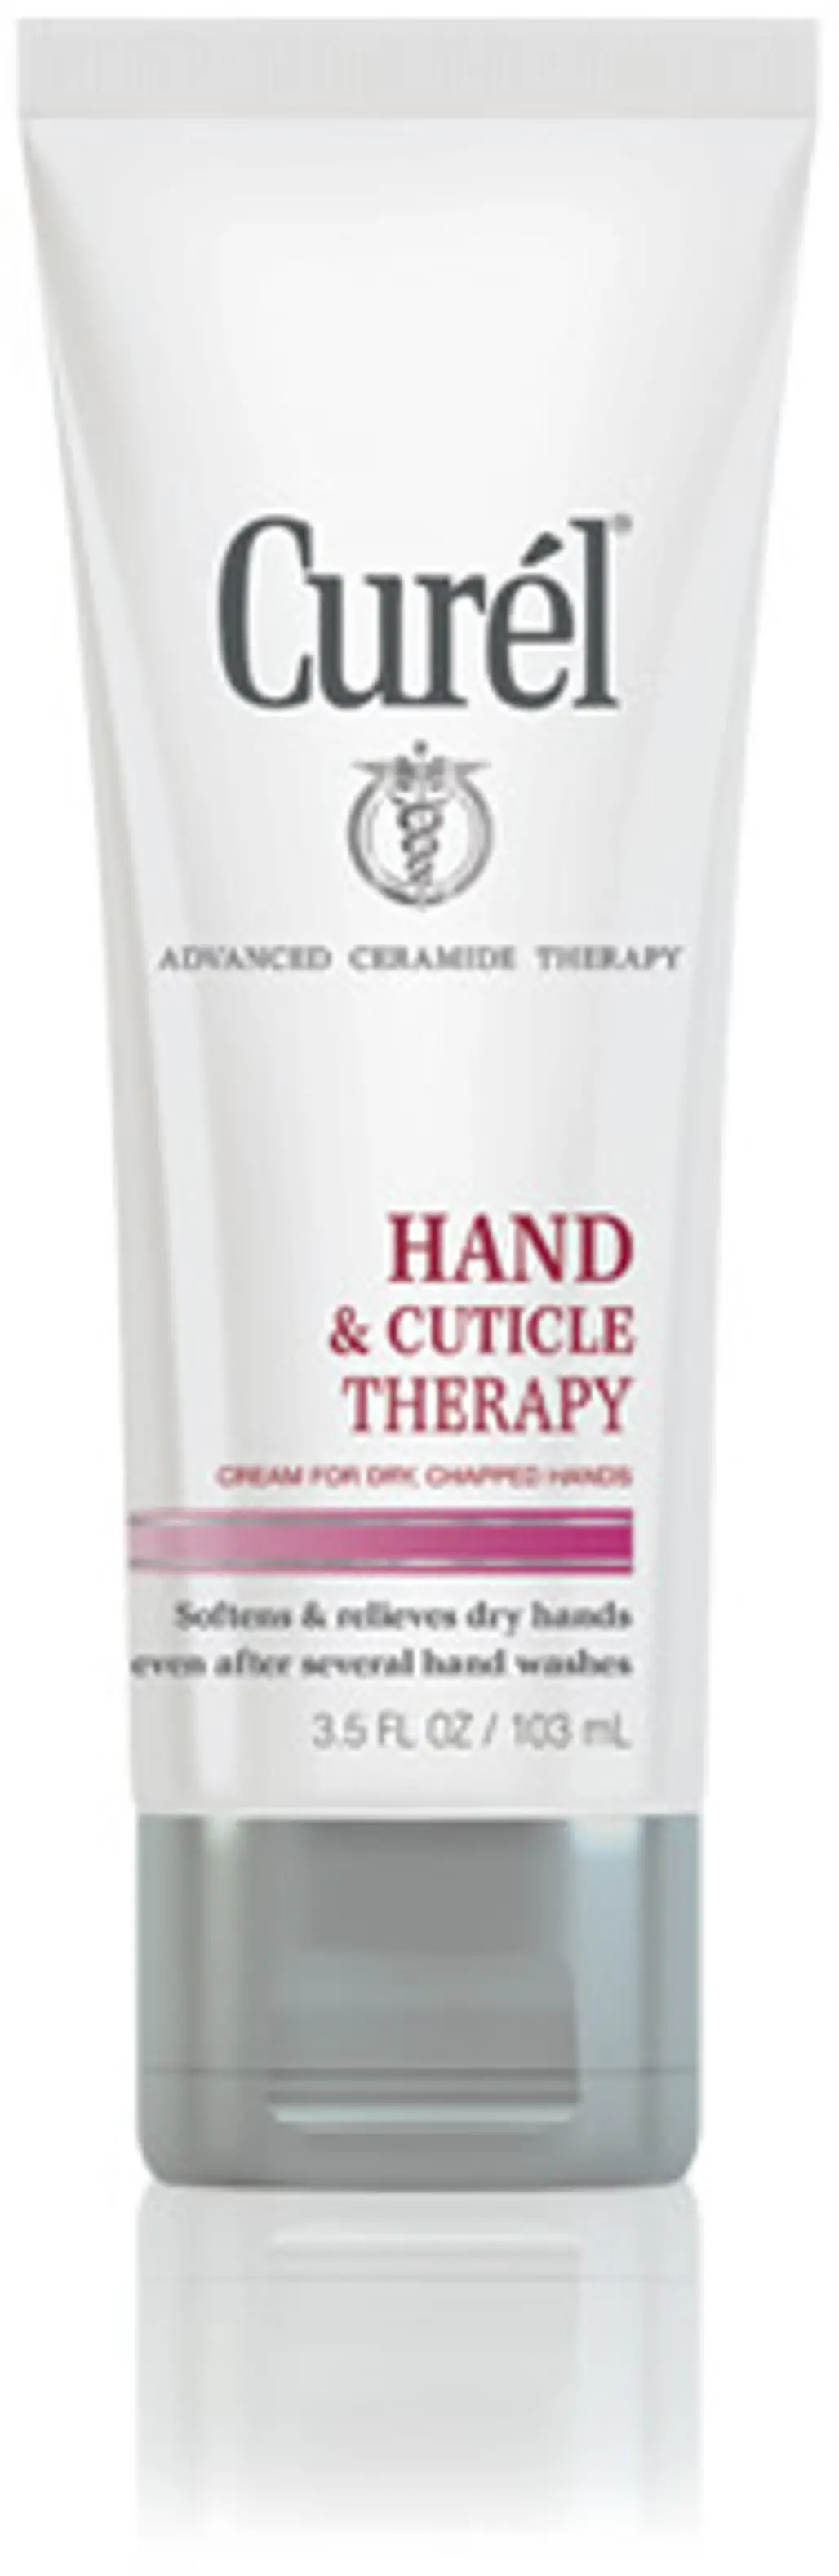 Curel Hand & Cuticle Therapy Cream